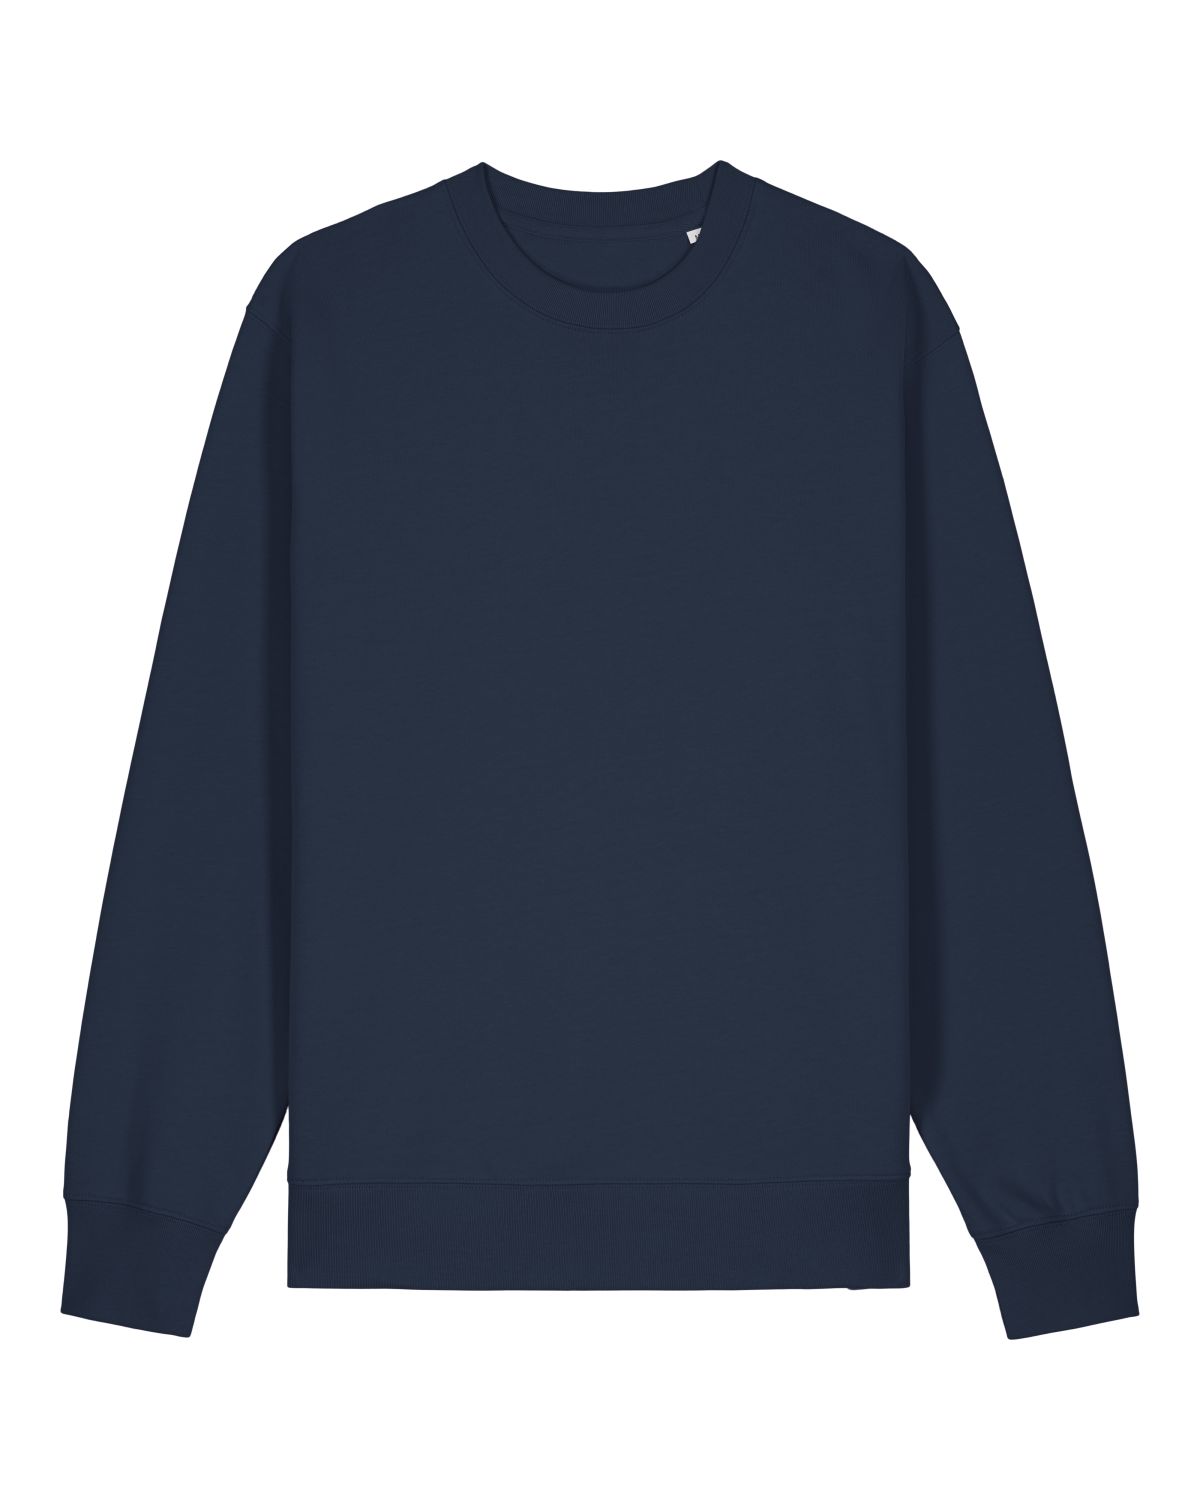 Customize your own sustainable college sweater made of 100% GOTS-certified organic cotton